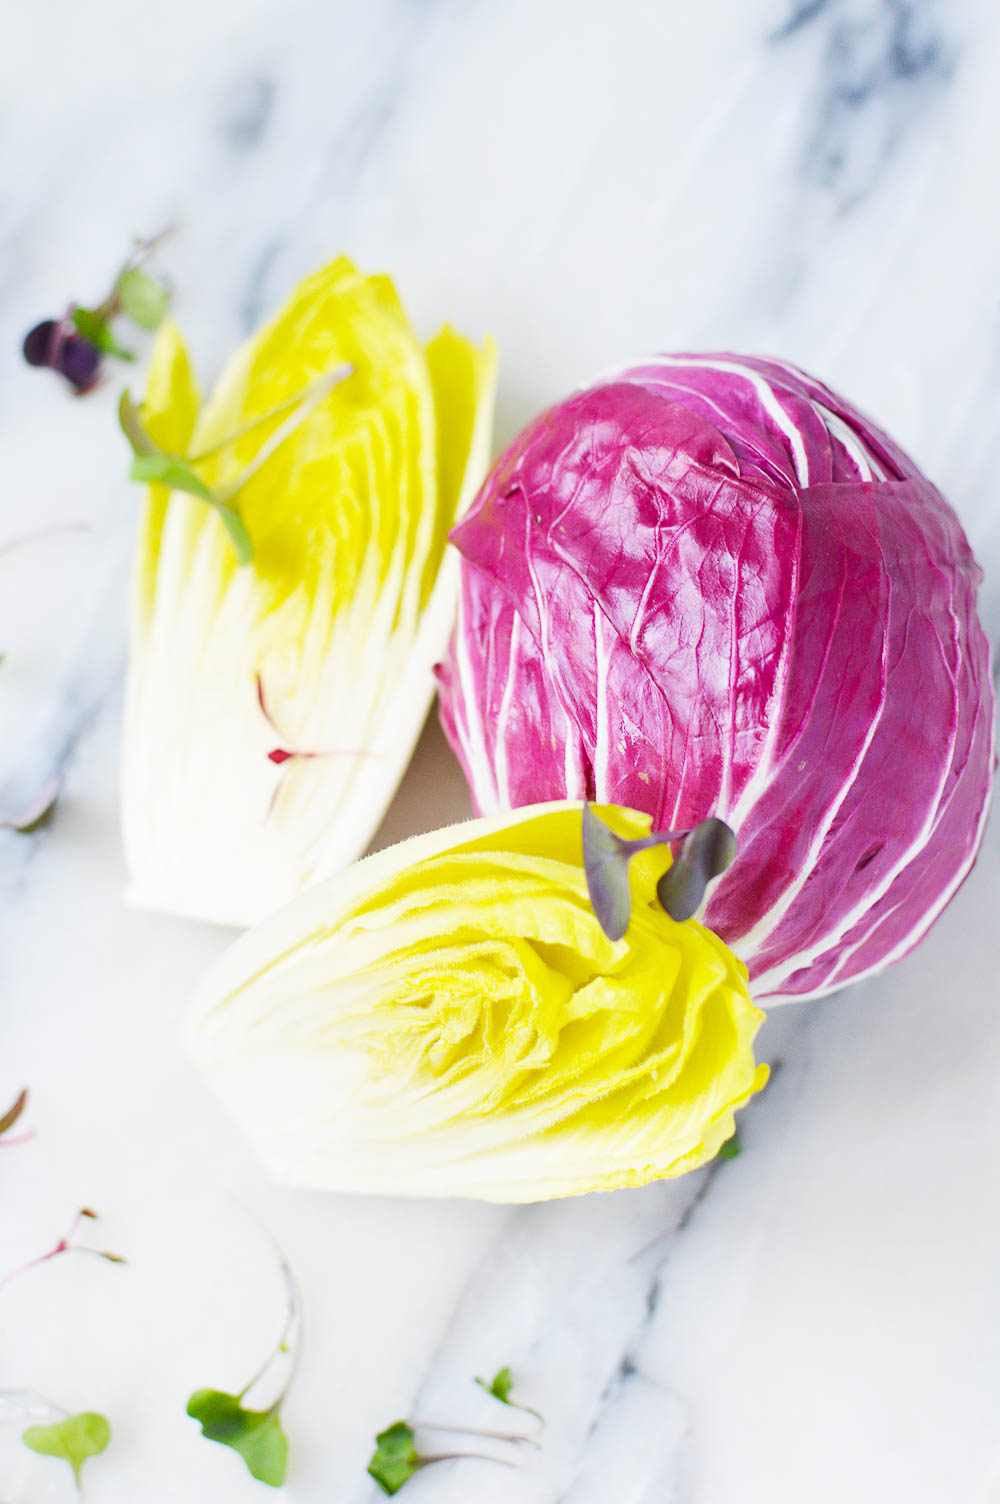 Radicchio and Endive Salad makes a healthy meal and brings out the best flavor